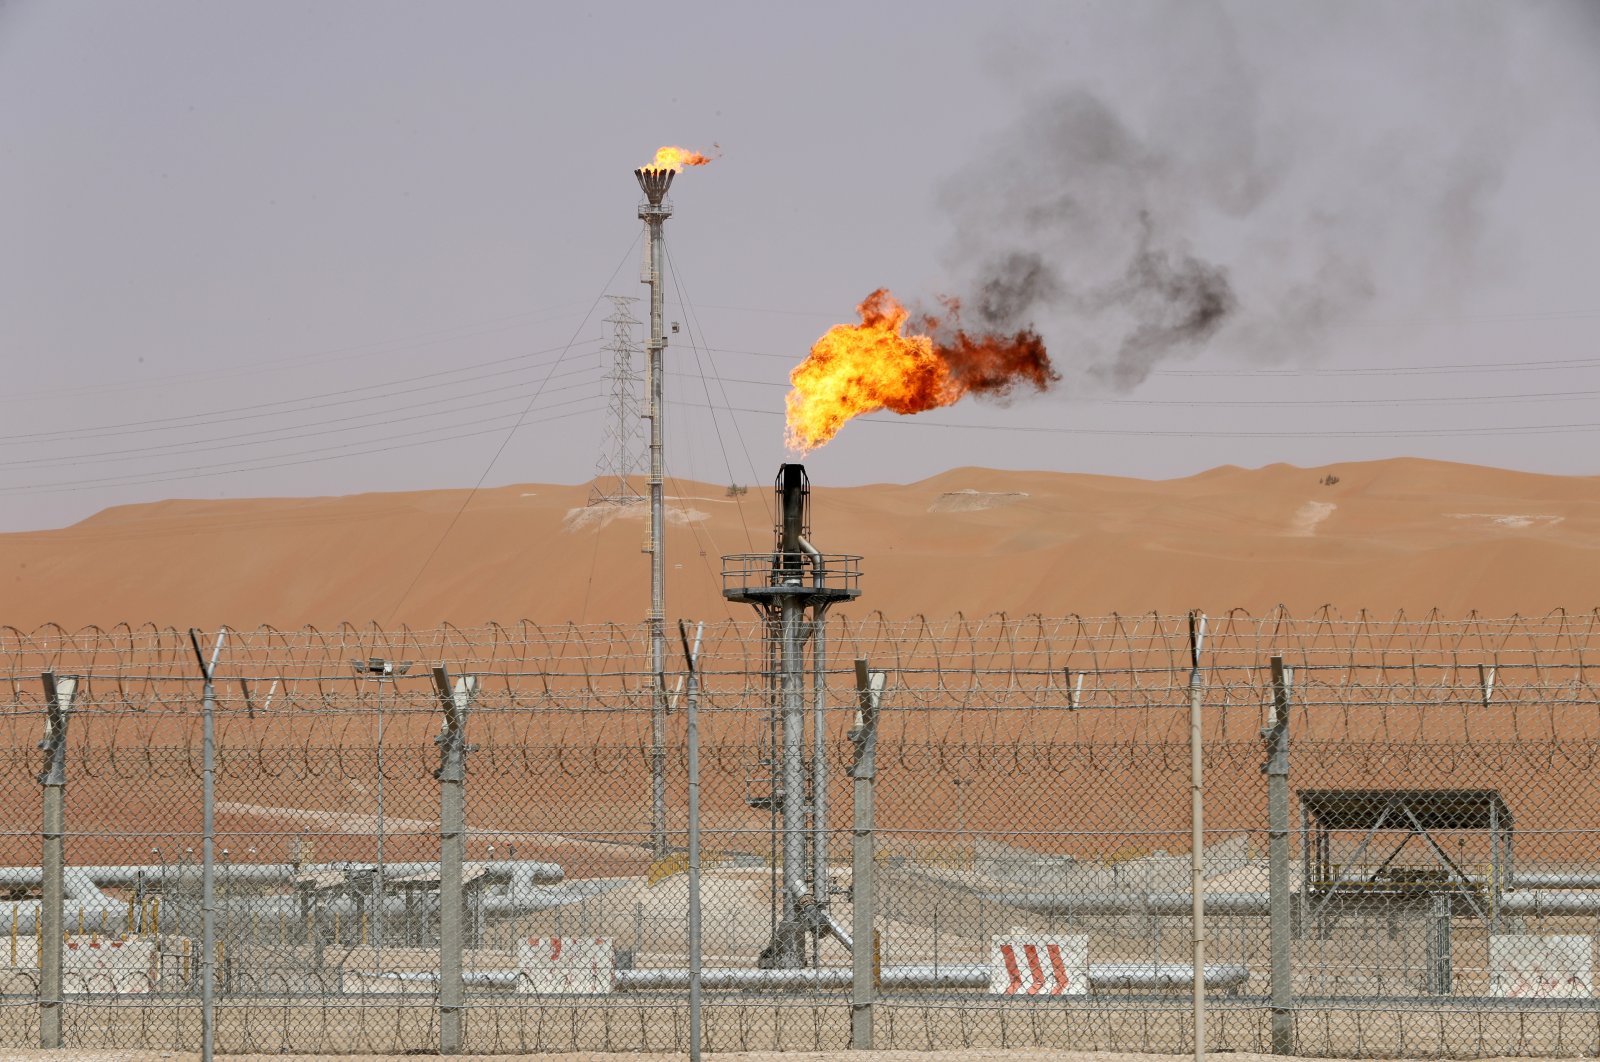 Flames are seen at the production facility of Saudi Aramco's Shaybah oil field in the Empty Quarter, Saudi Arabia, May 22, 2018. (Reuters Photo)